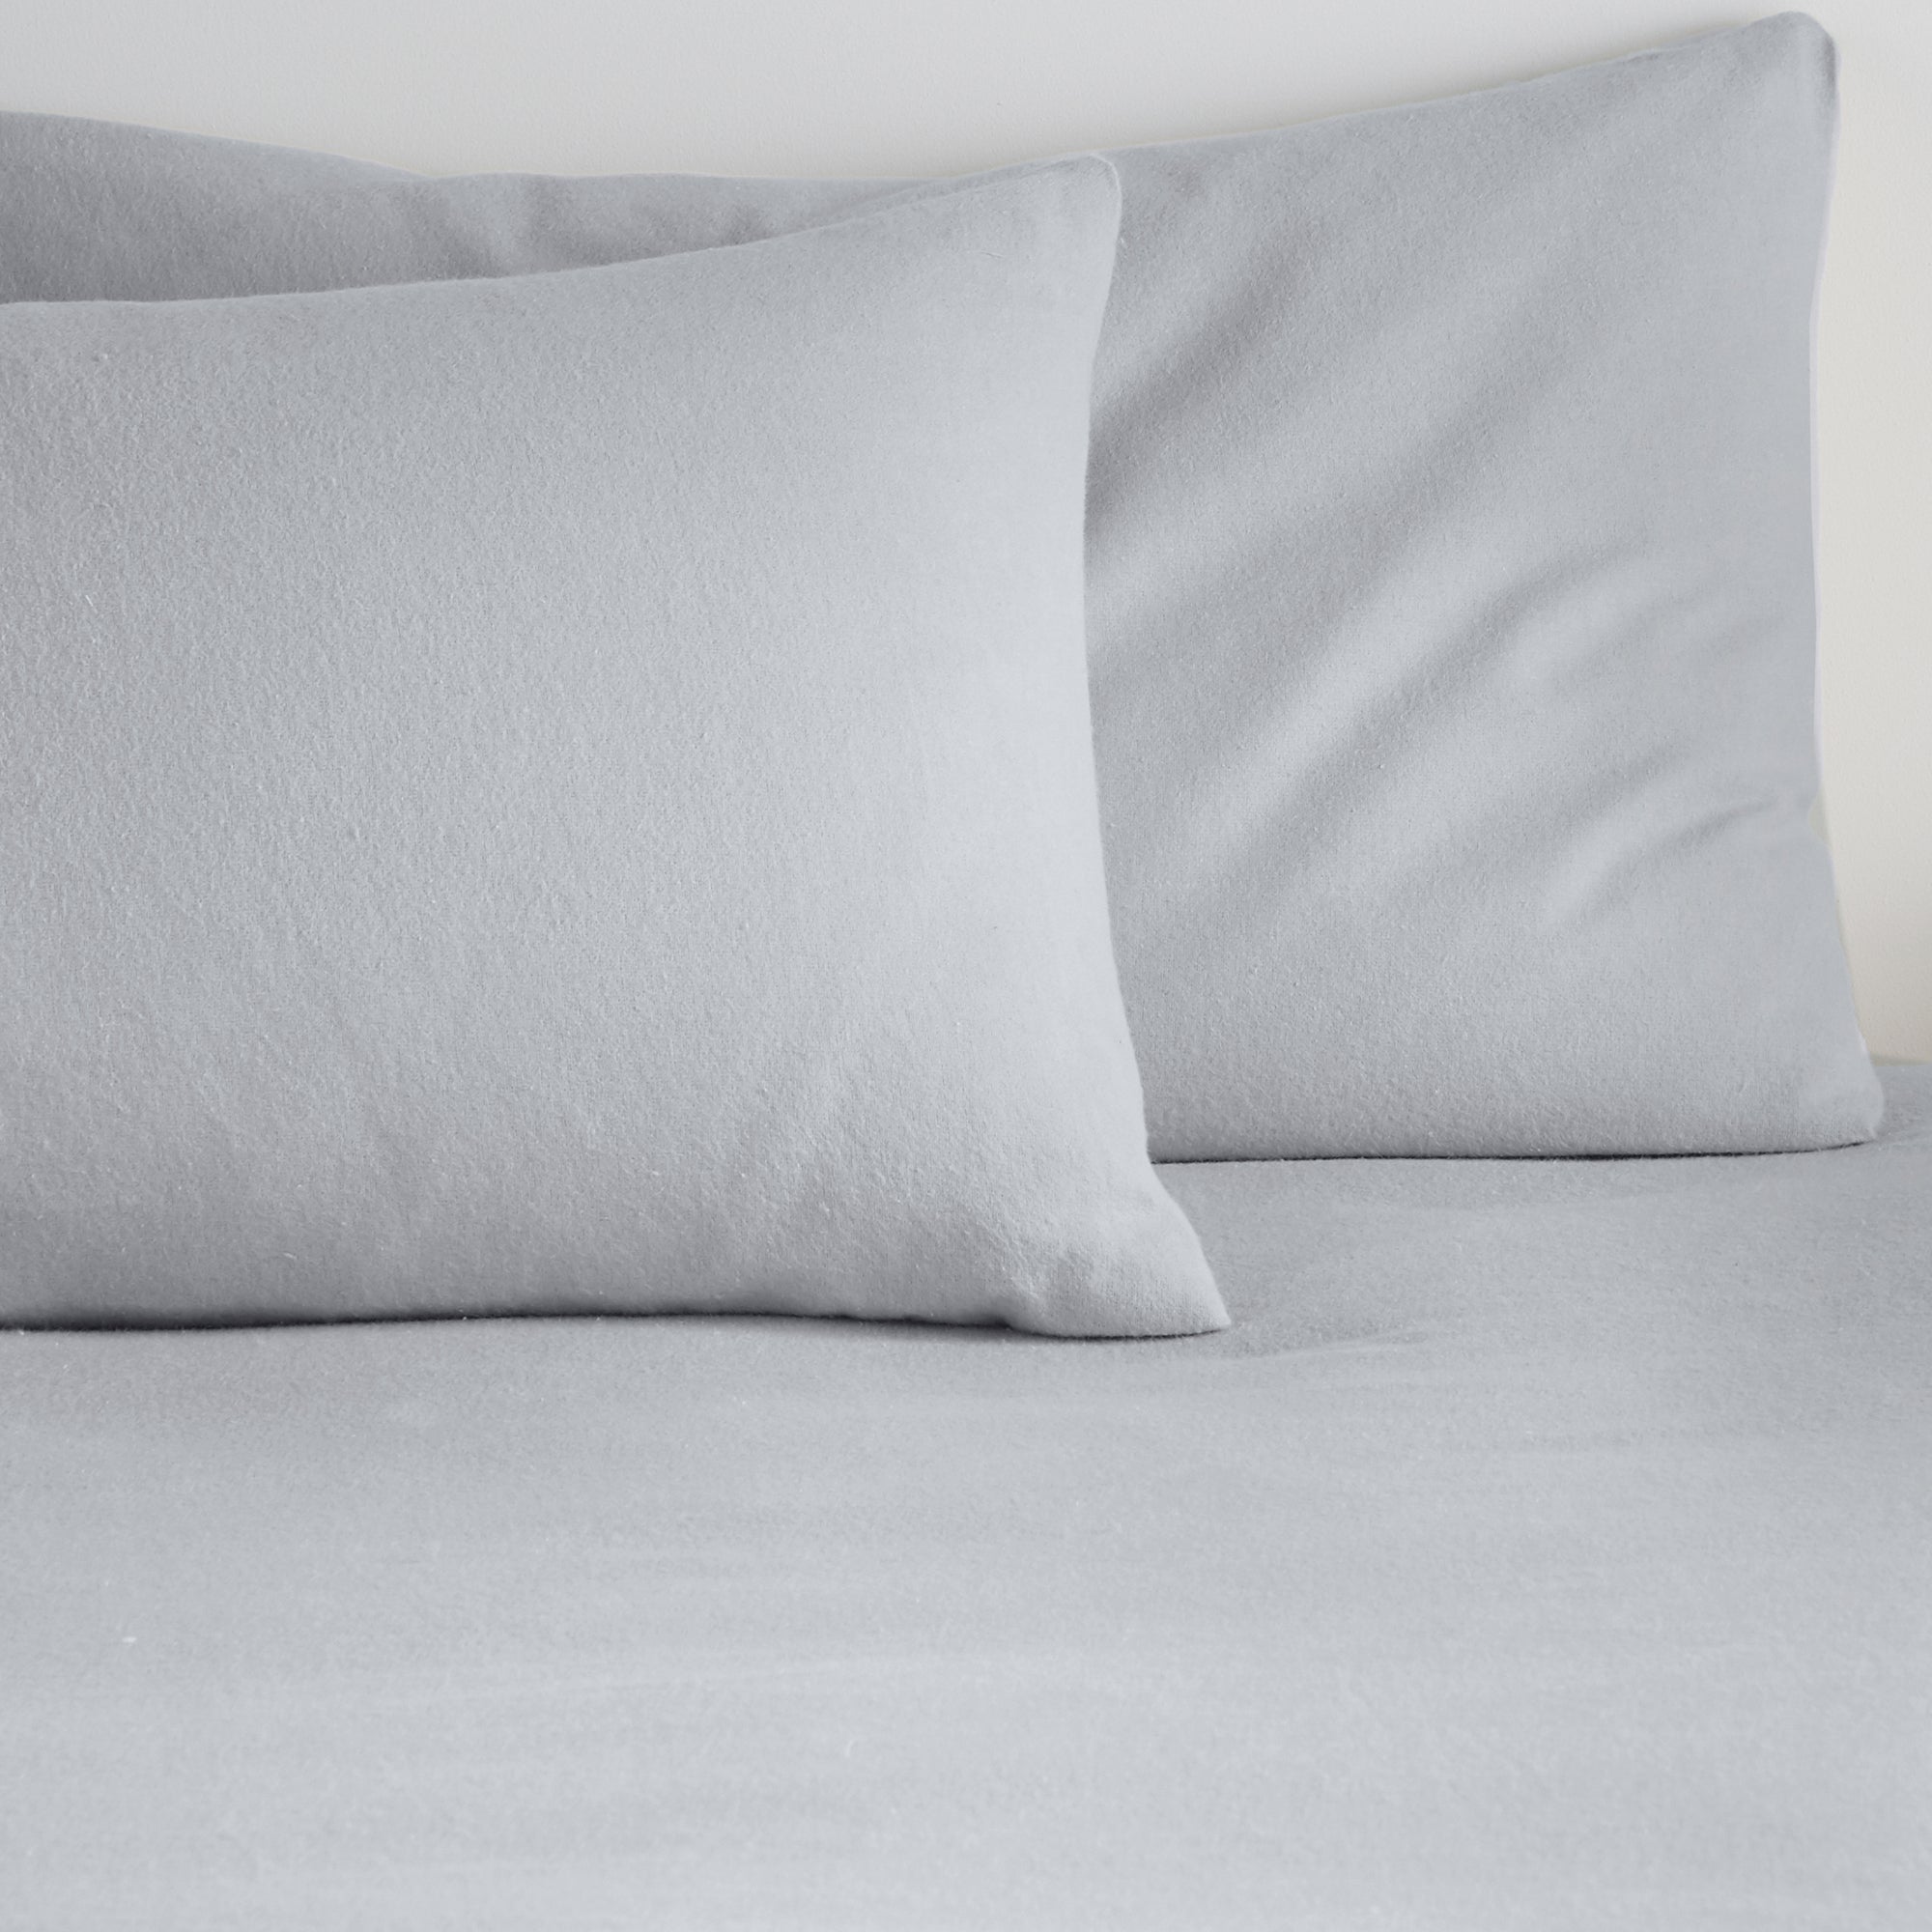 Brushed Bedding -  28cm Fitted Sheet and Optional Pillowcases -  in Silver by Fusion